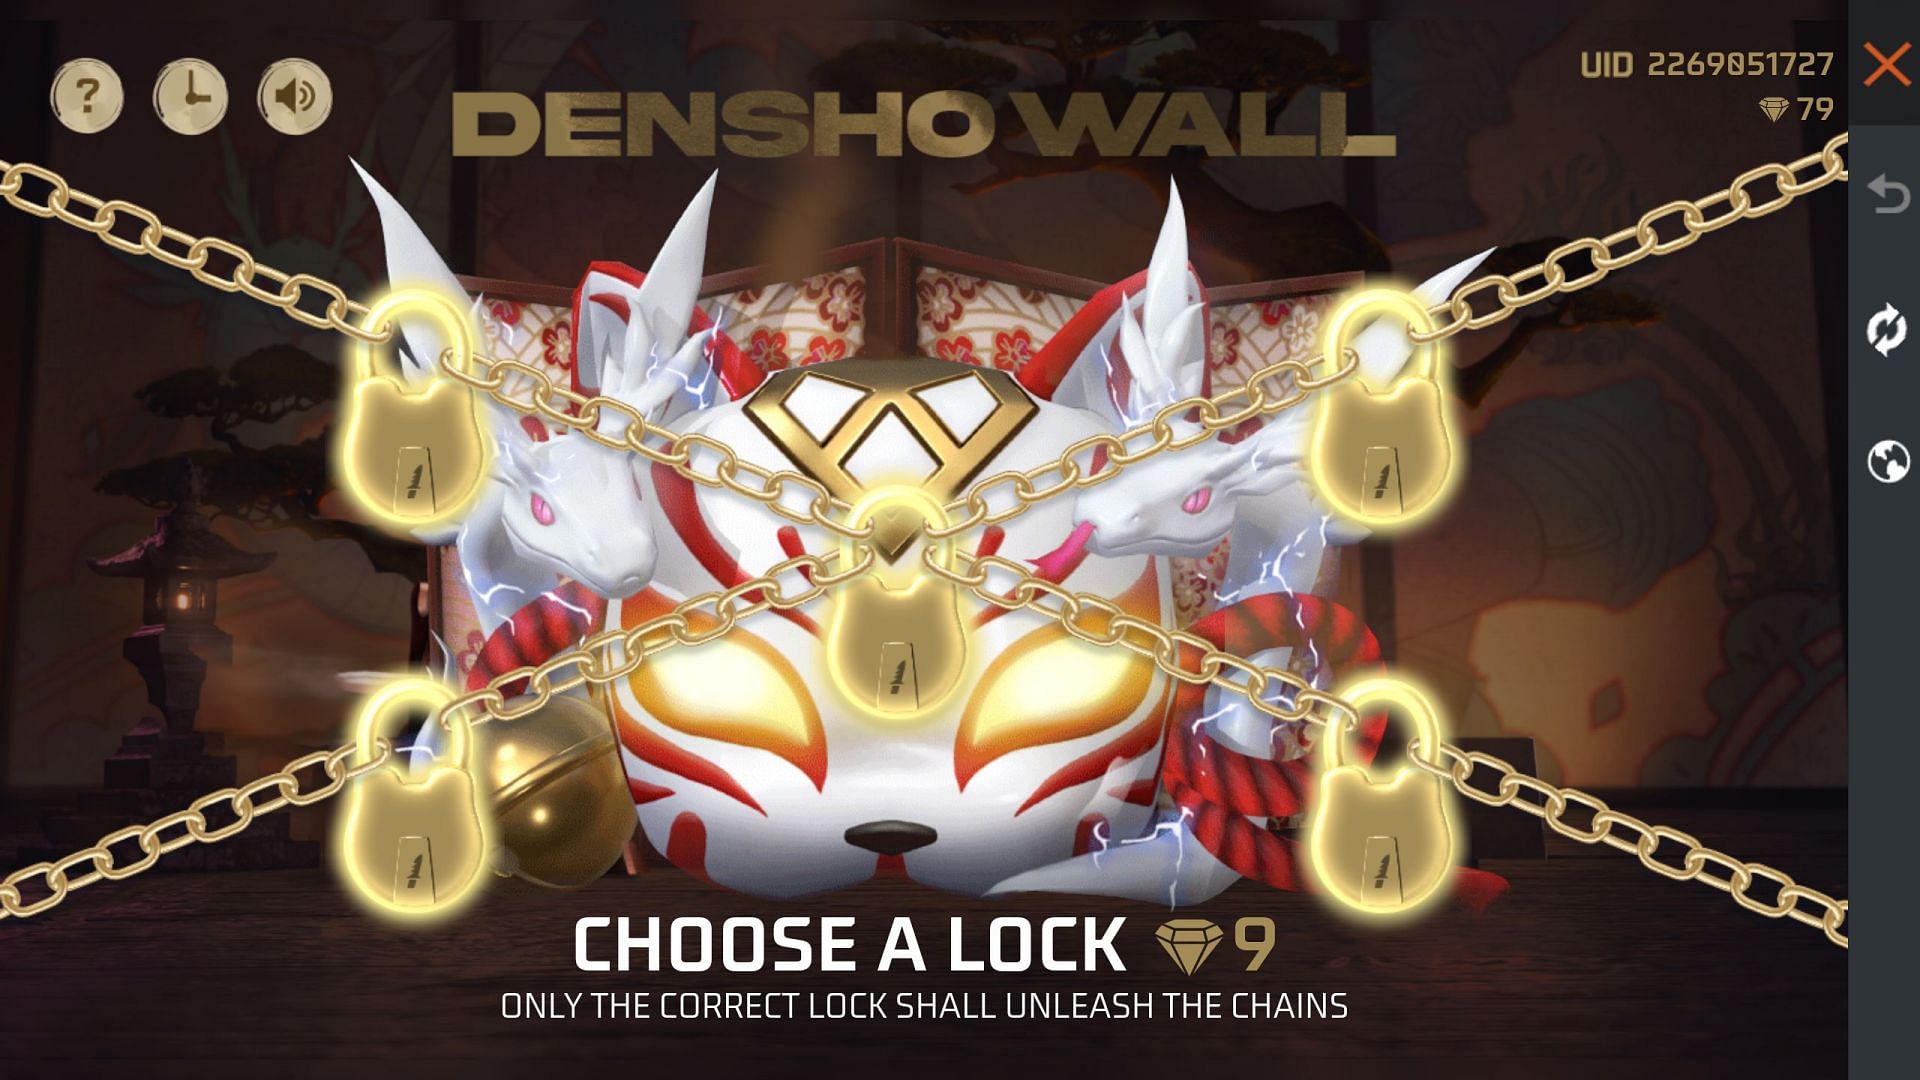 You can choose the first lock for 9 diamonds (Image via Garena)